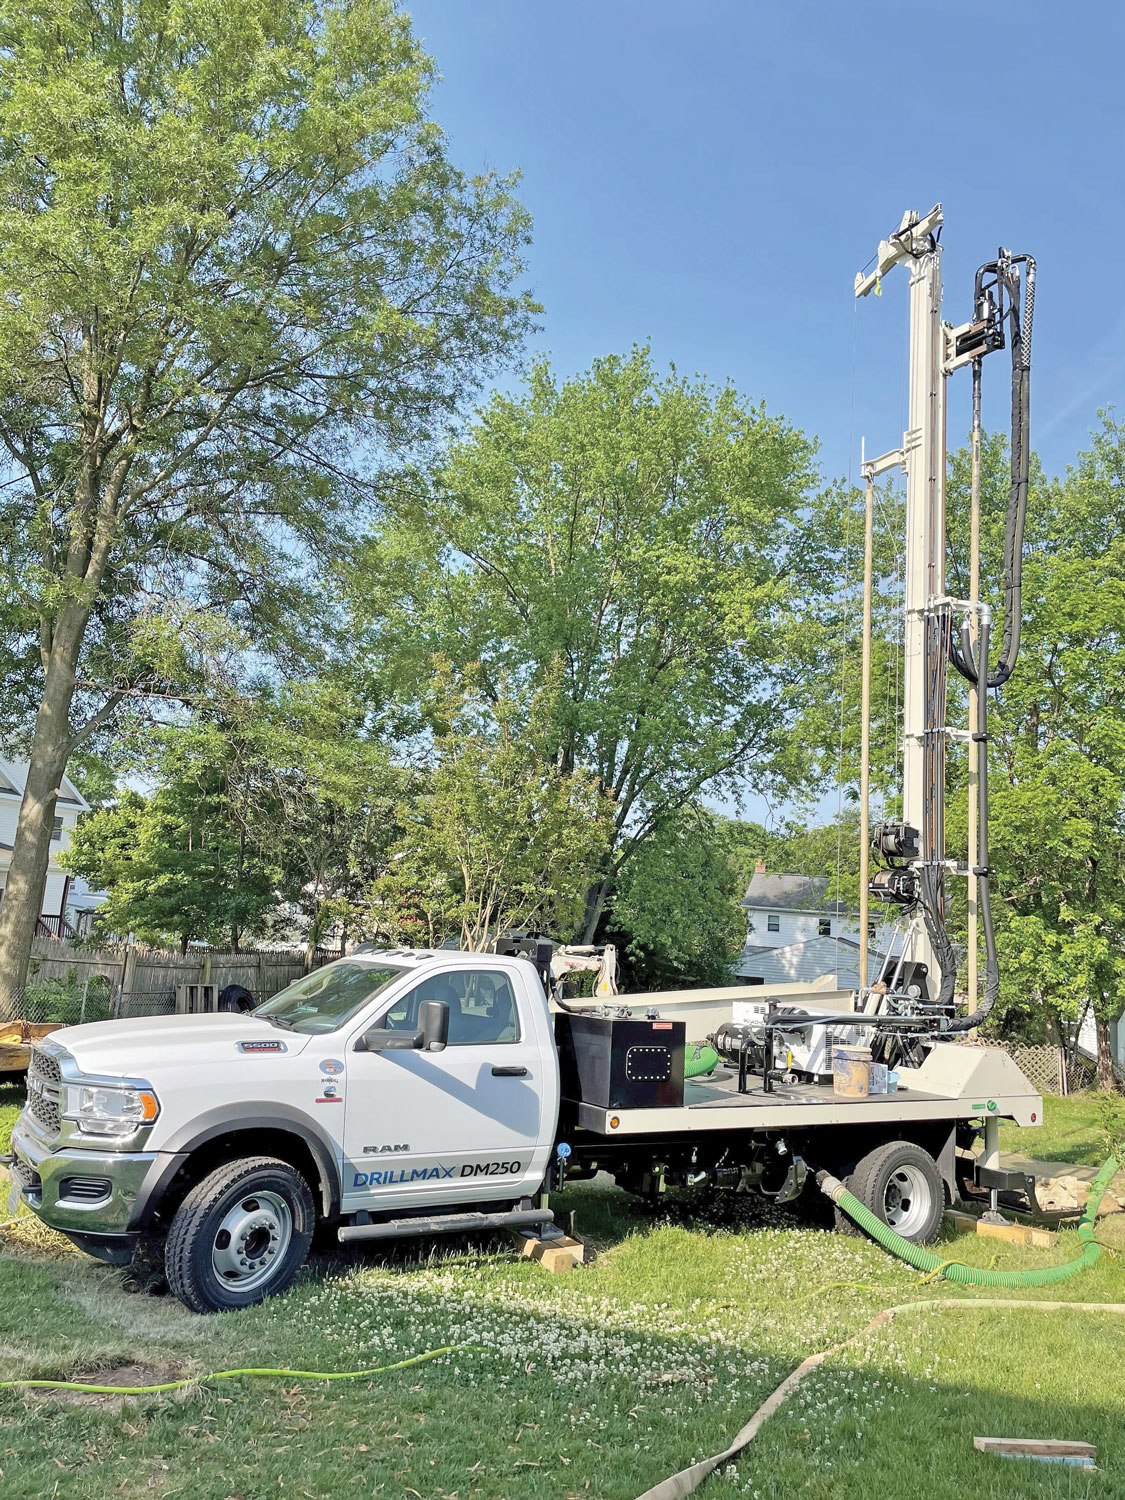 Purchased for its mud rotary capabilities, the DM250 performs air drilling rock wells in palm-sized cobbles using an auxiliary air compressor for the air rotary drilling.